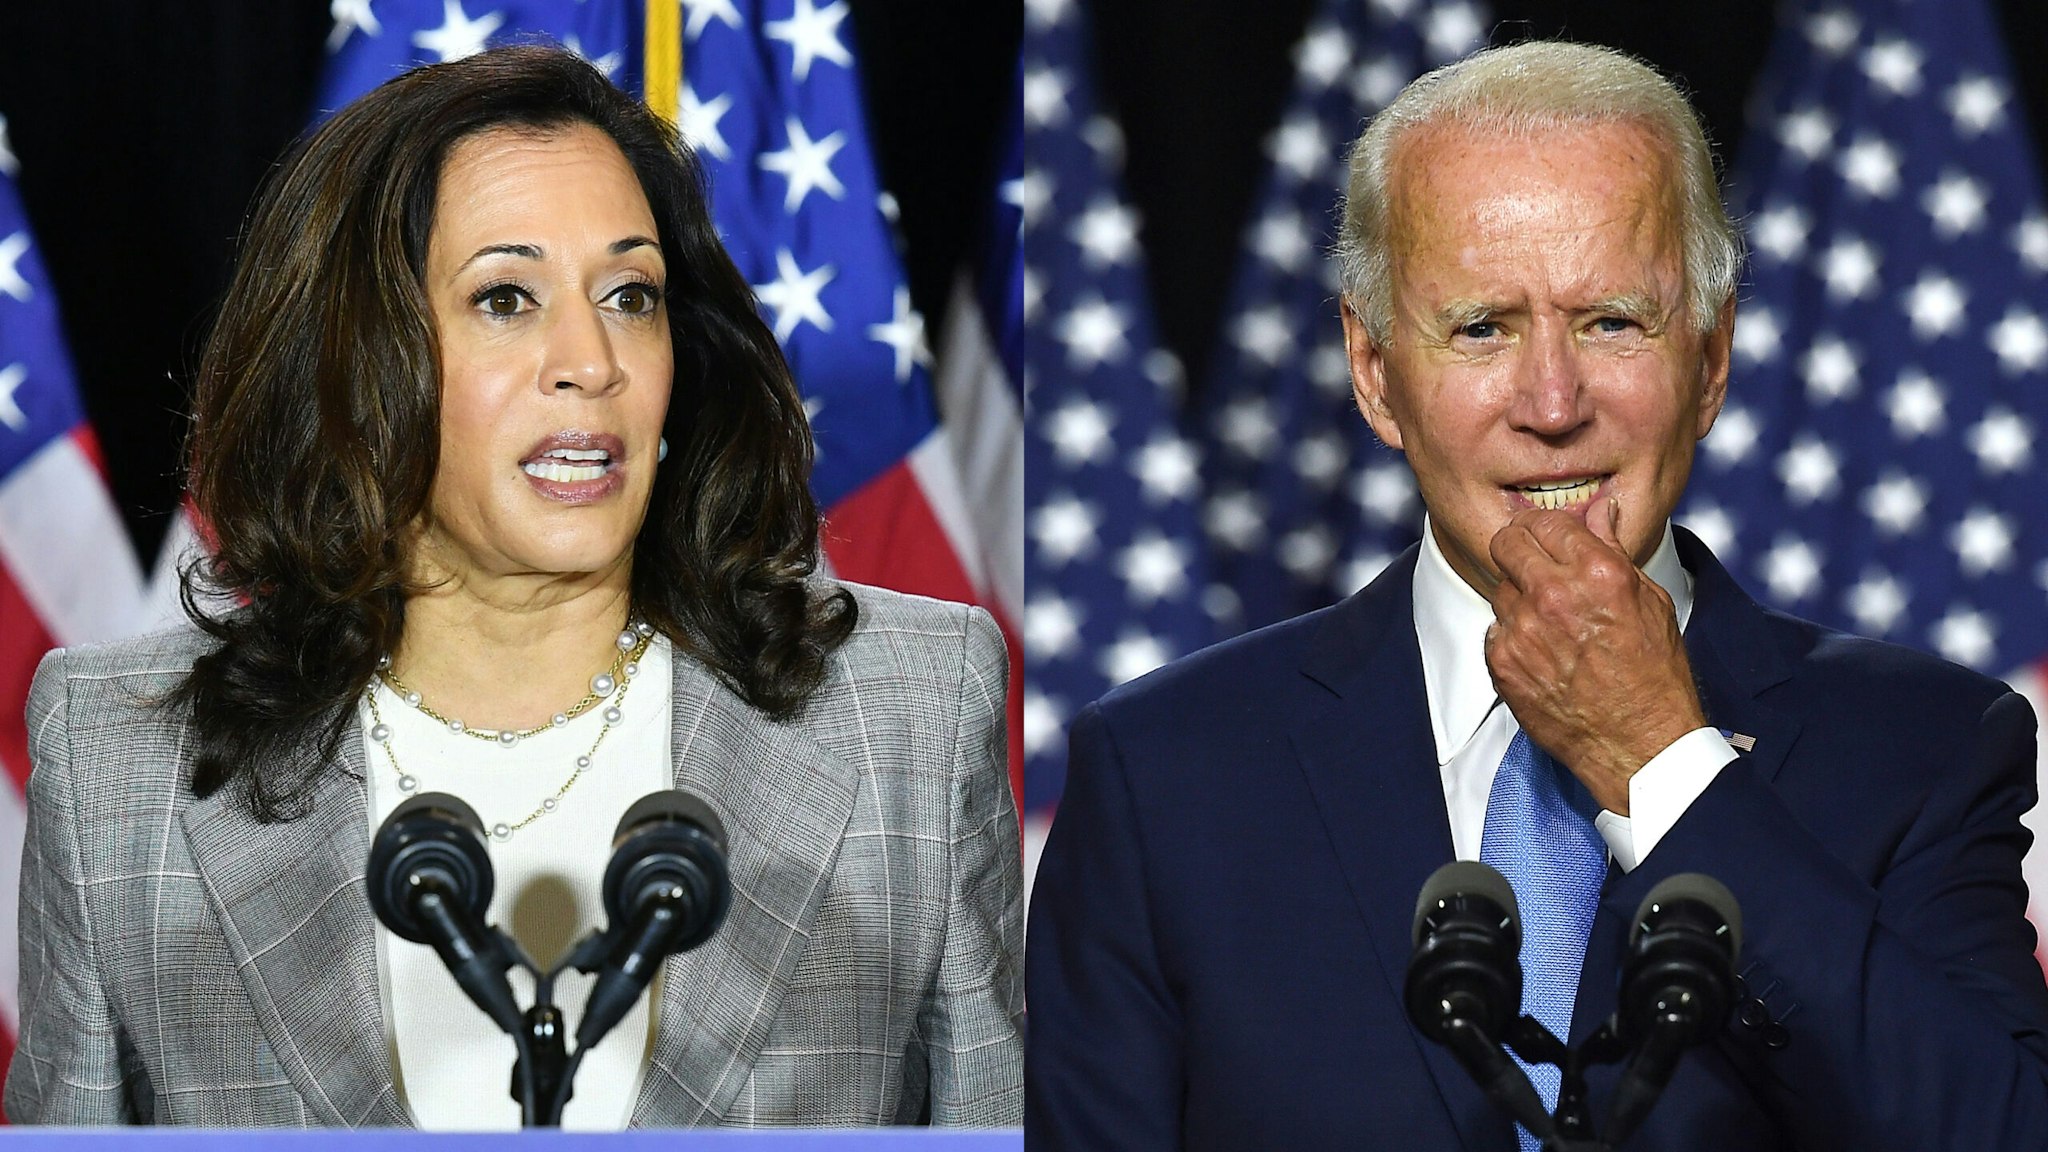 Democratic vice presidential running mate, US Senator Kamala Harris, speaks to the press after receiving a briefing on COVID-19 in Wilmington, Delaware, on August 13, 2020.